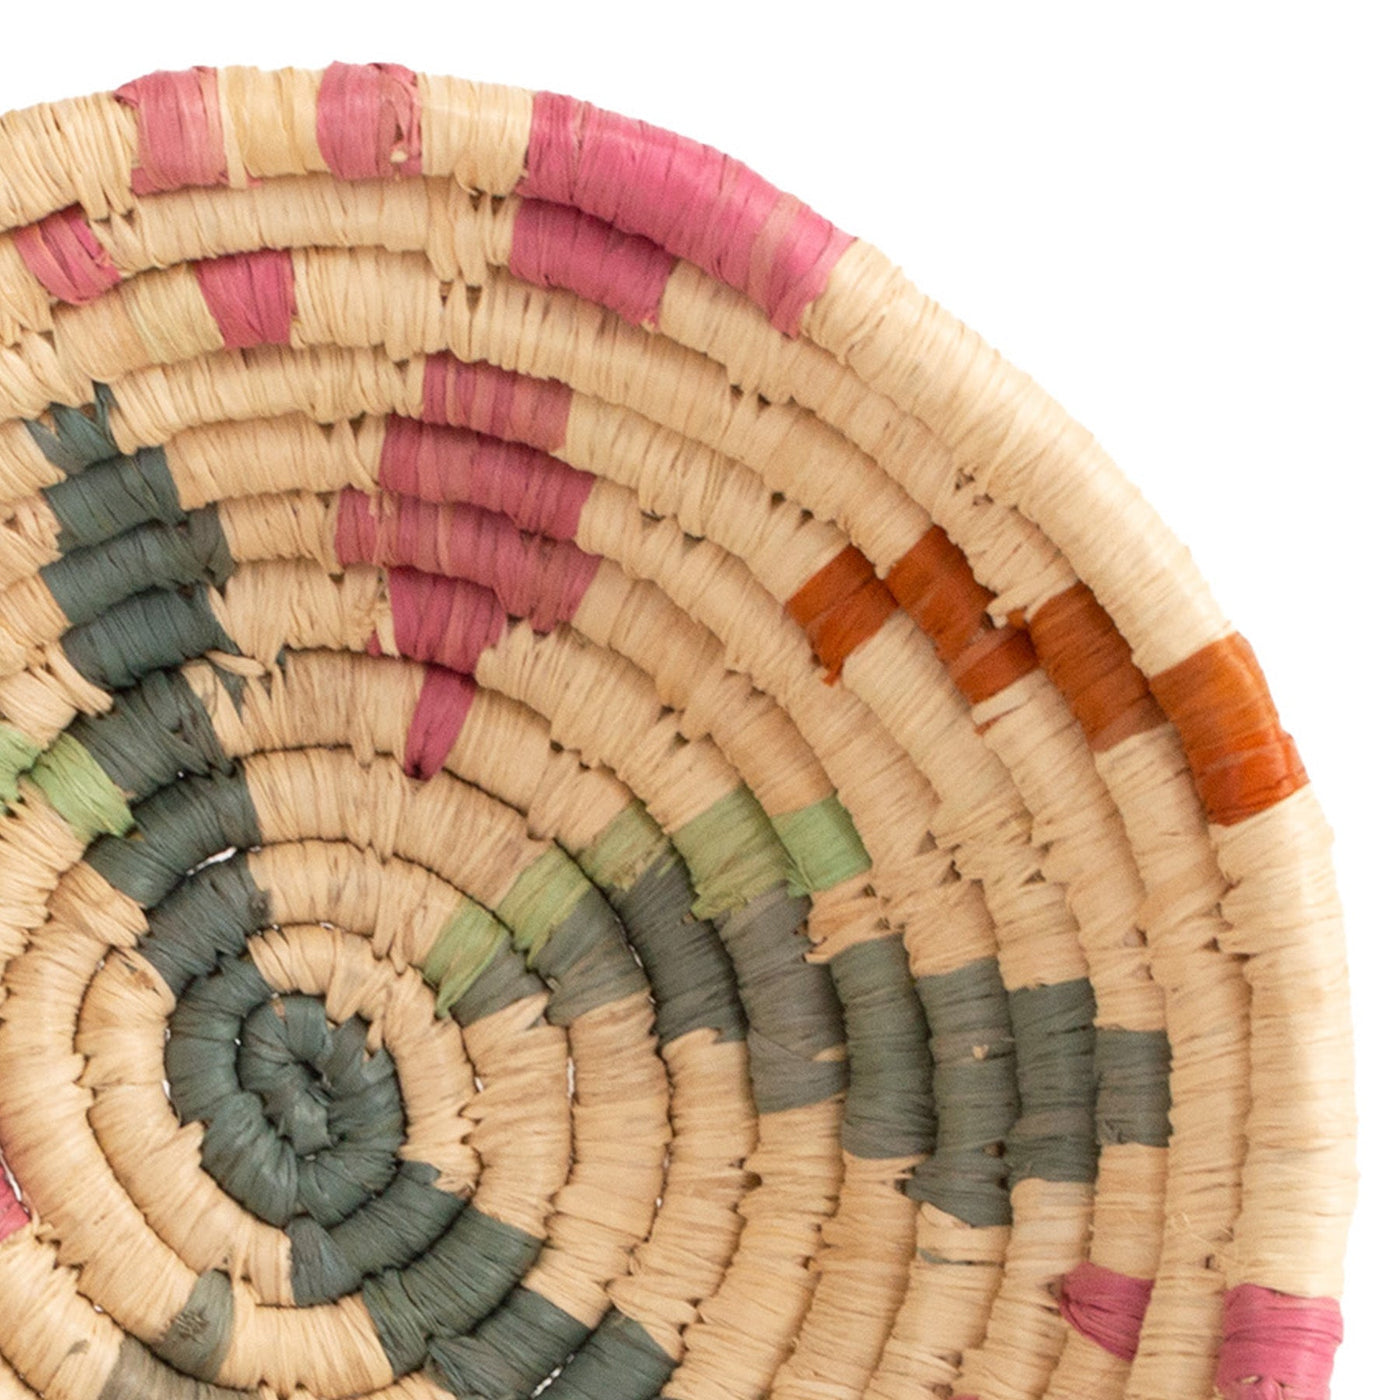 Handmade African artisan home decor from Kazi All Across Africa eco-friendly sustainable fair-trade goods